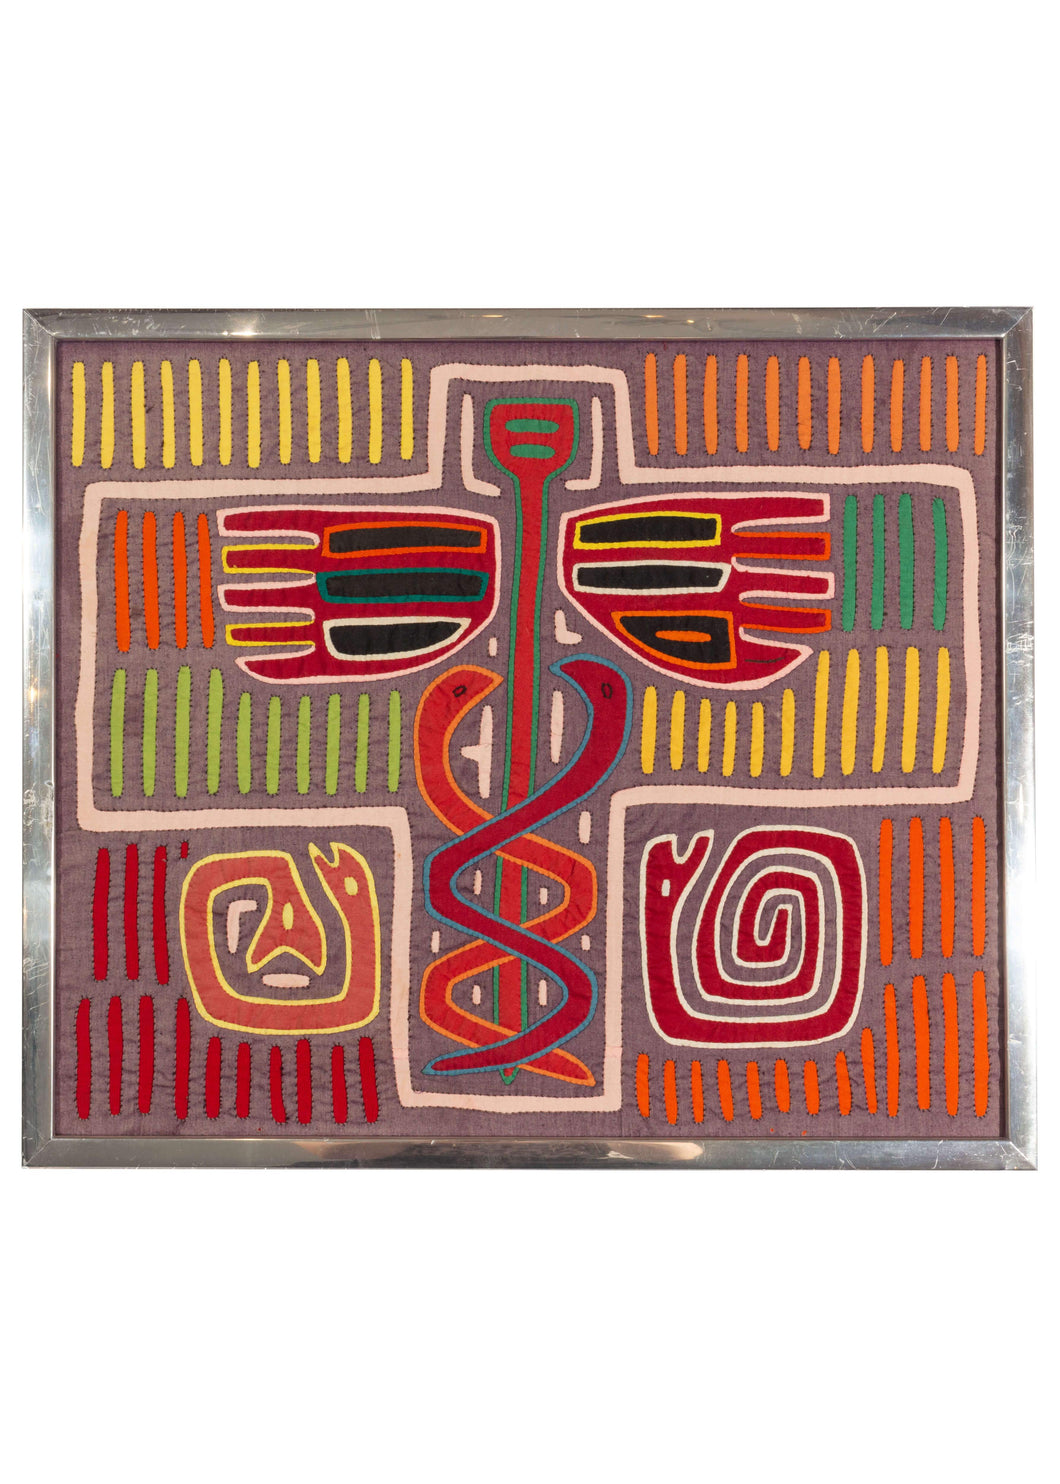 Framed Kuna Mola Cloth featuring vibrant yet faded tones of purple, green, red, orange, yellow and blue. A central cross features interlocking snakes climbing a pole. The left base features a two headed snake and the left base a snake in pinwheel form. Vertical lines in different colors add interest and excitement to the piece. It has been framed in an aluminum frame some years ago. 